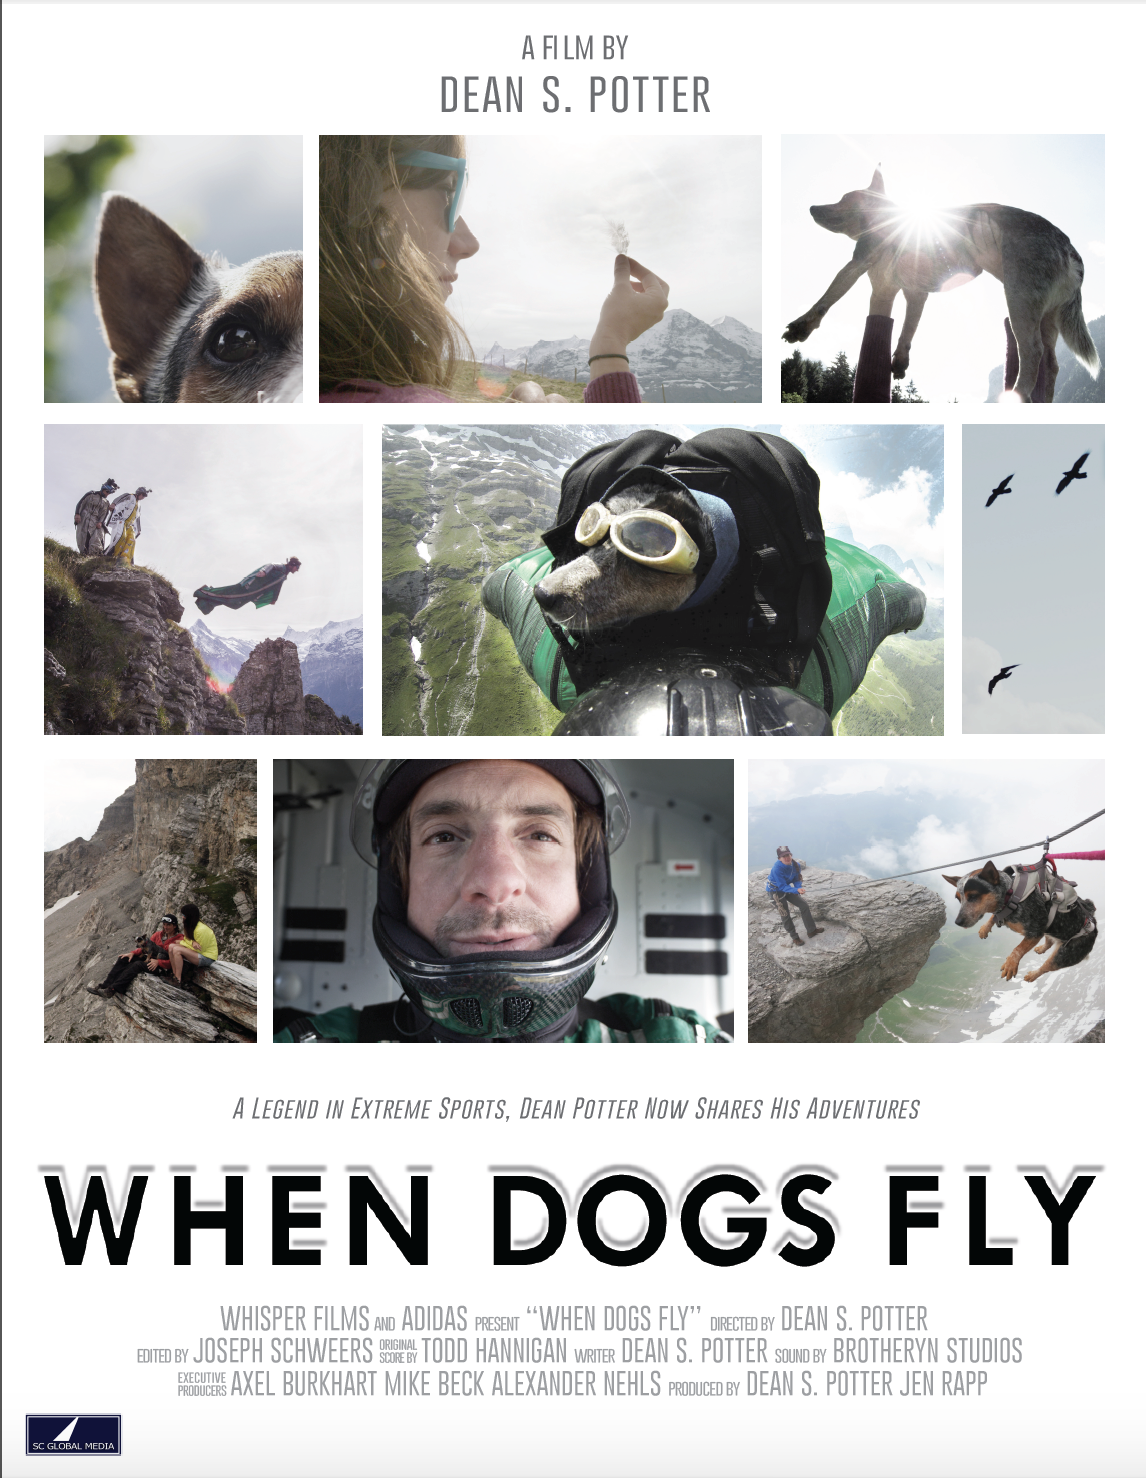 My dog can fly. Dean Potter and Whisper Dogs can Fly.